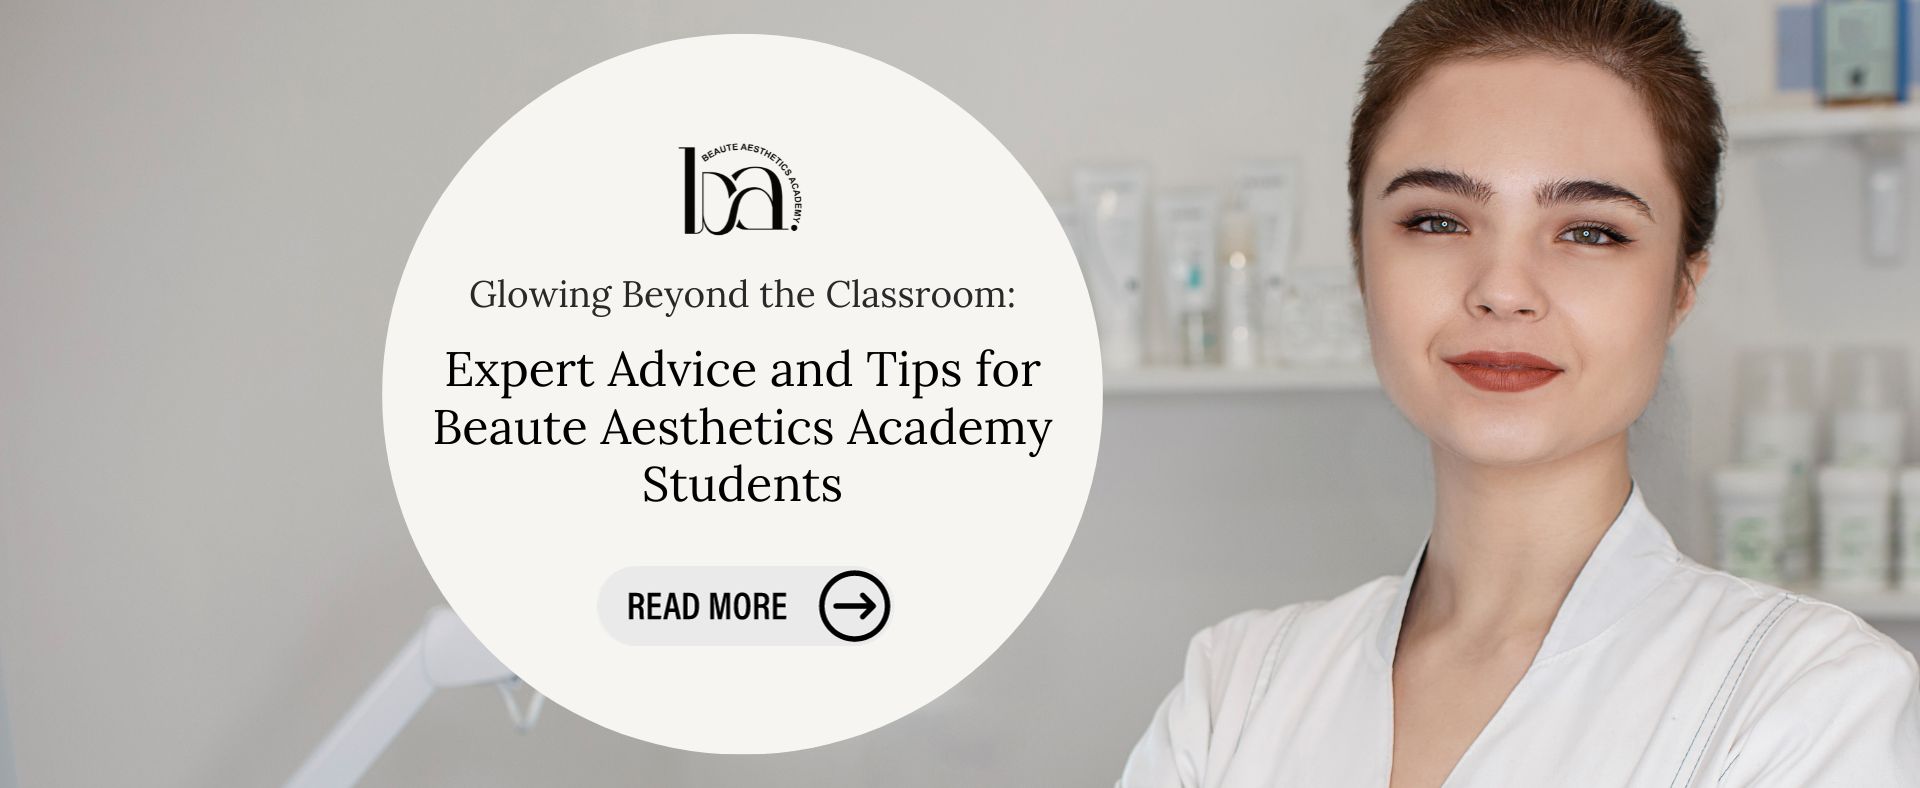 Expert Advice and Tips for Beaute Aesthetics Academy Students